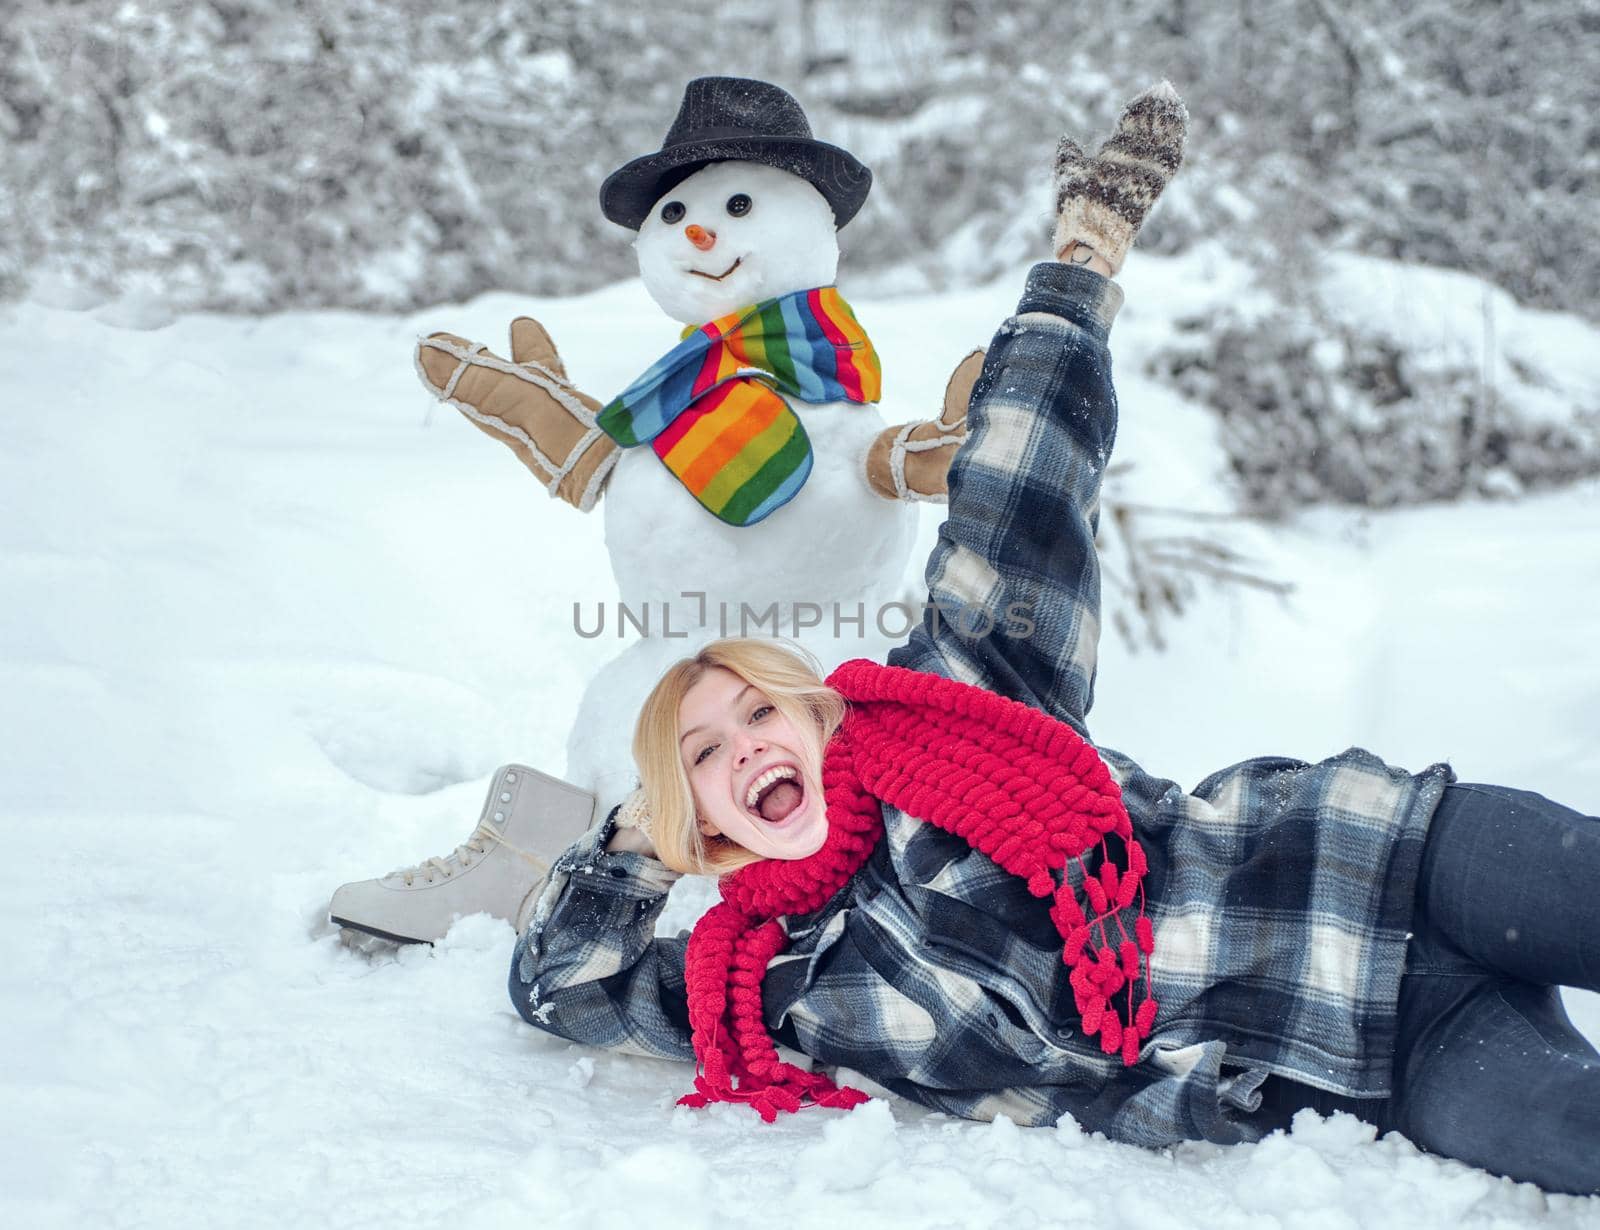 Winter woman. Greeting snowman. Snowman and funny female model standing in winter hat and scarf with red nose. Cute snowman at a snowy village